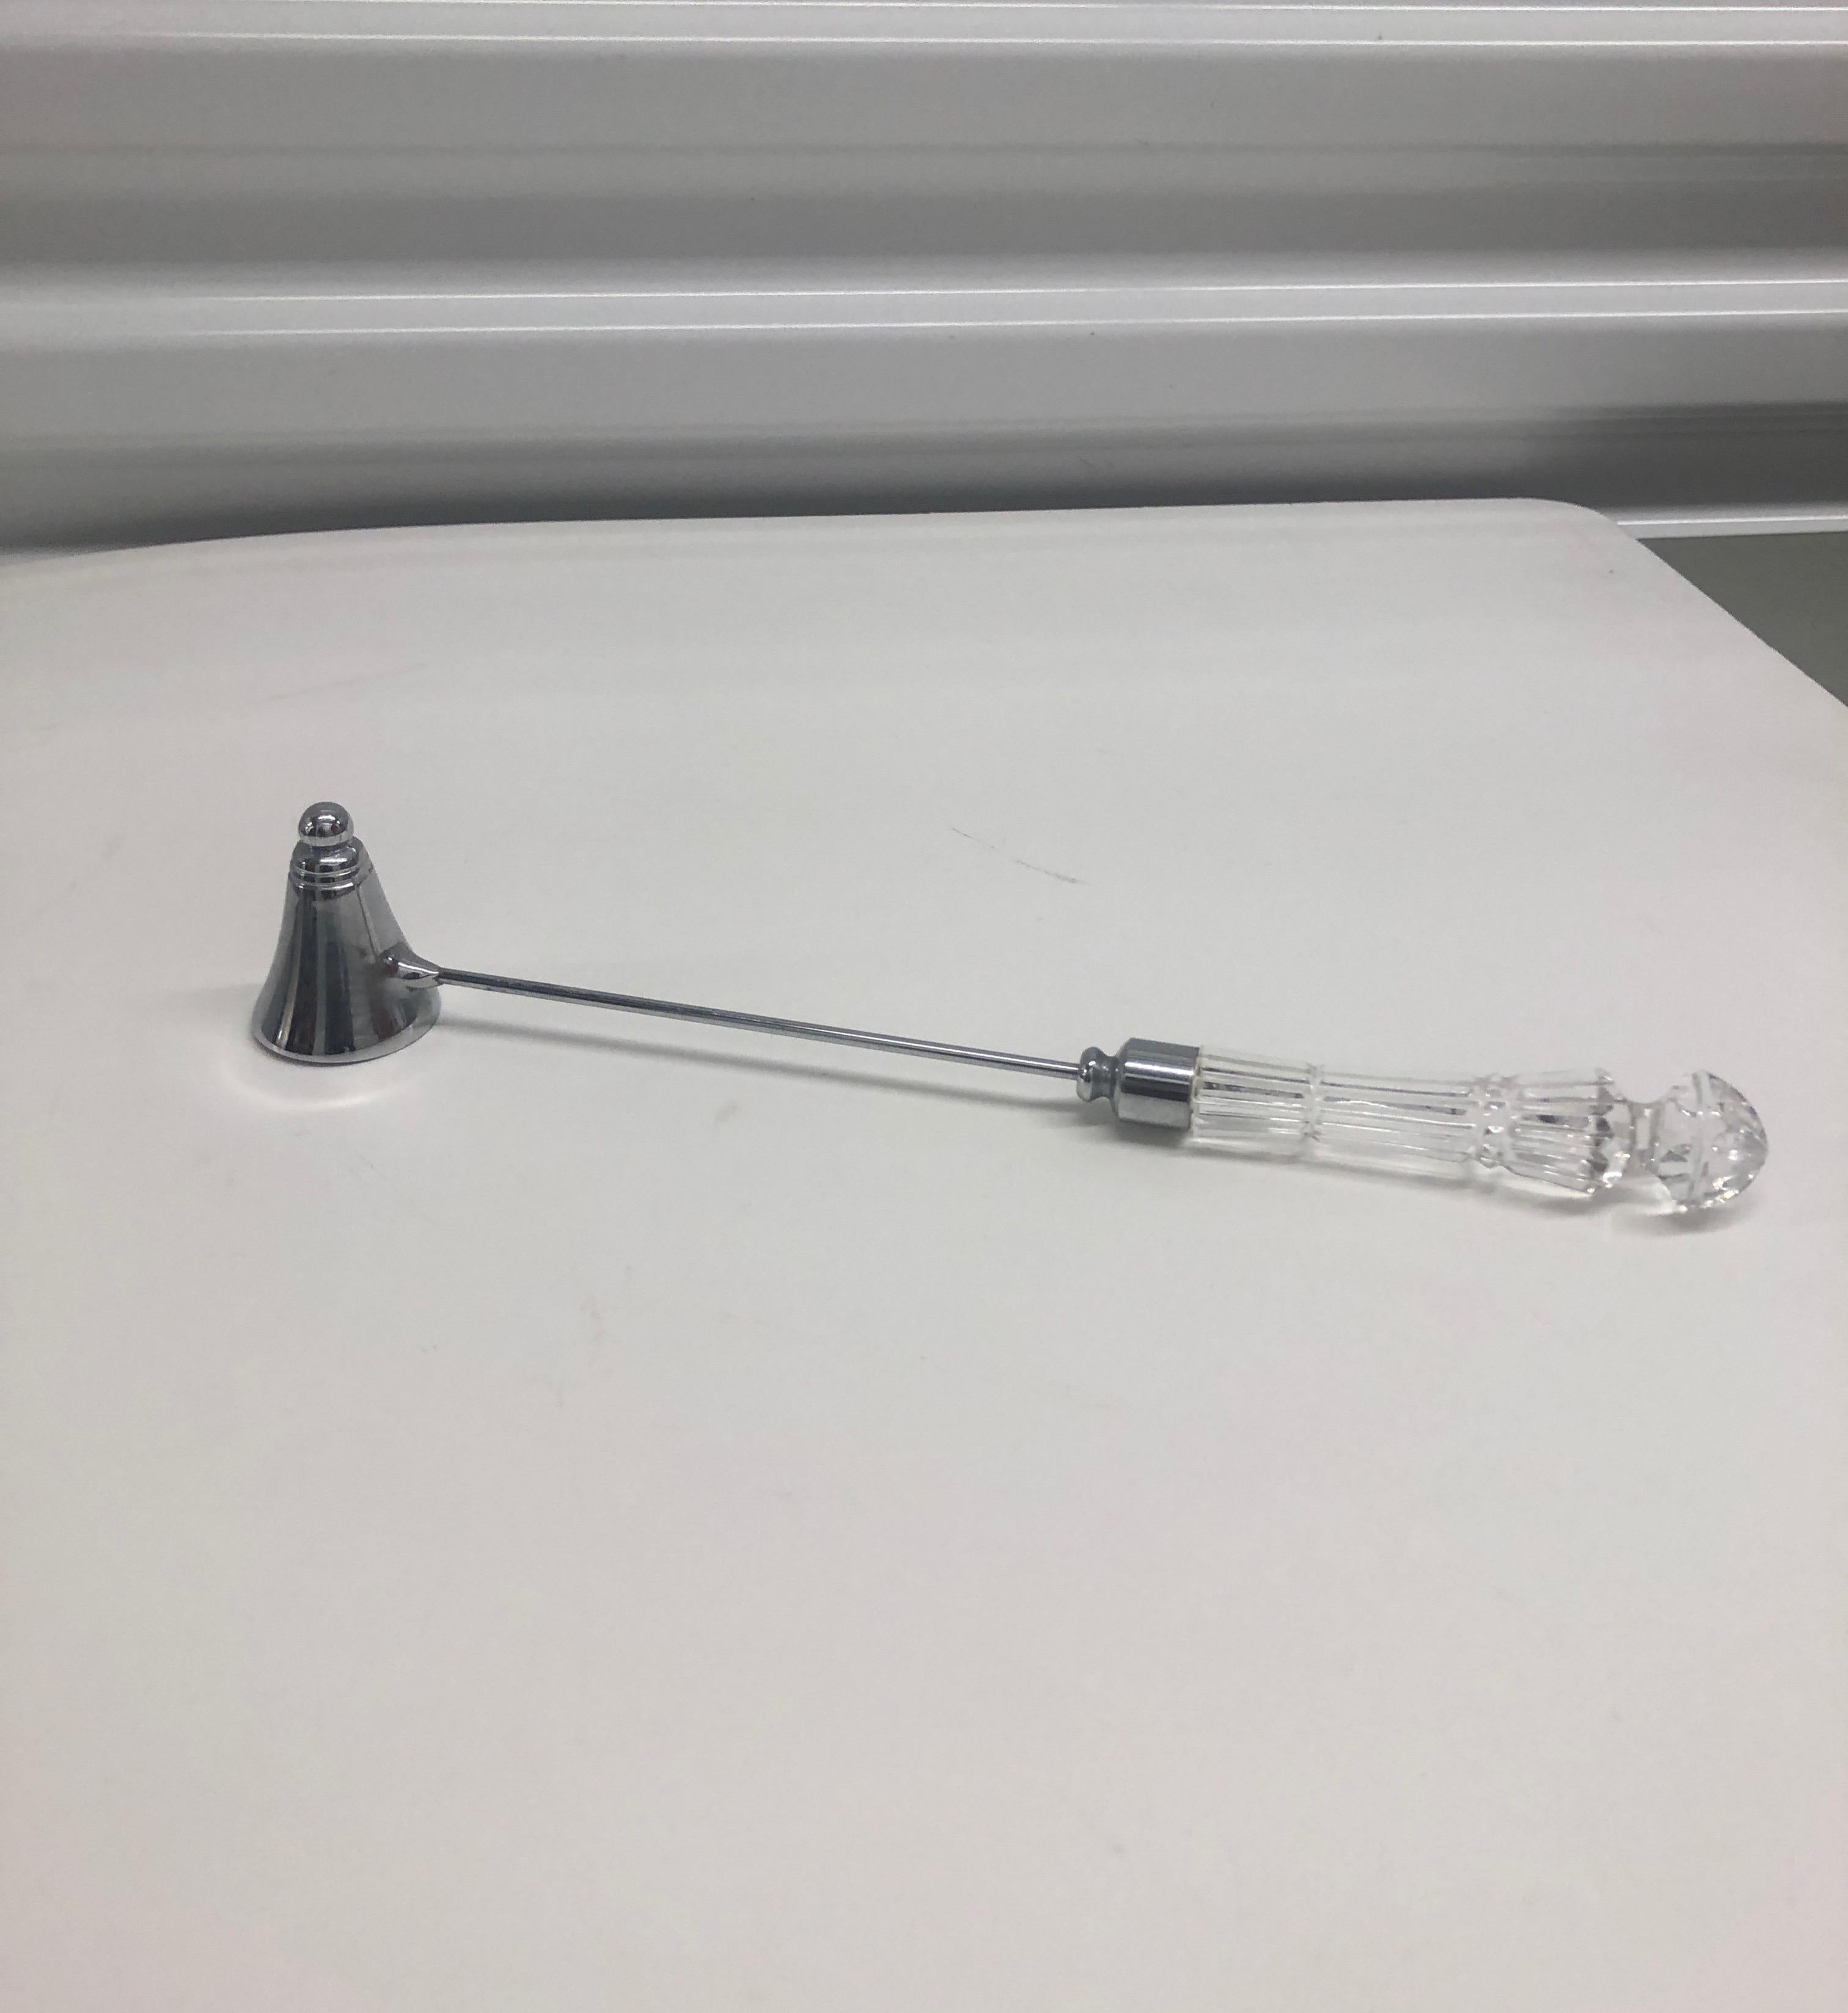 Polished chrome crystal candle snuffer.
Size: 11